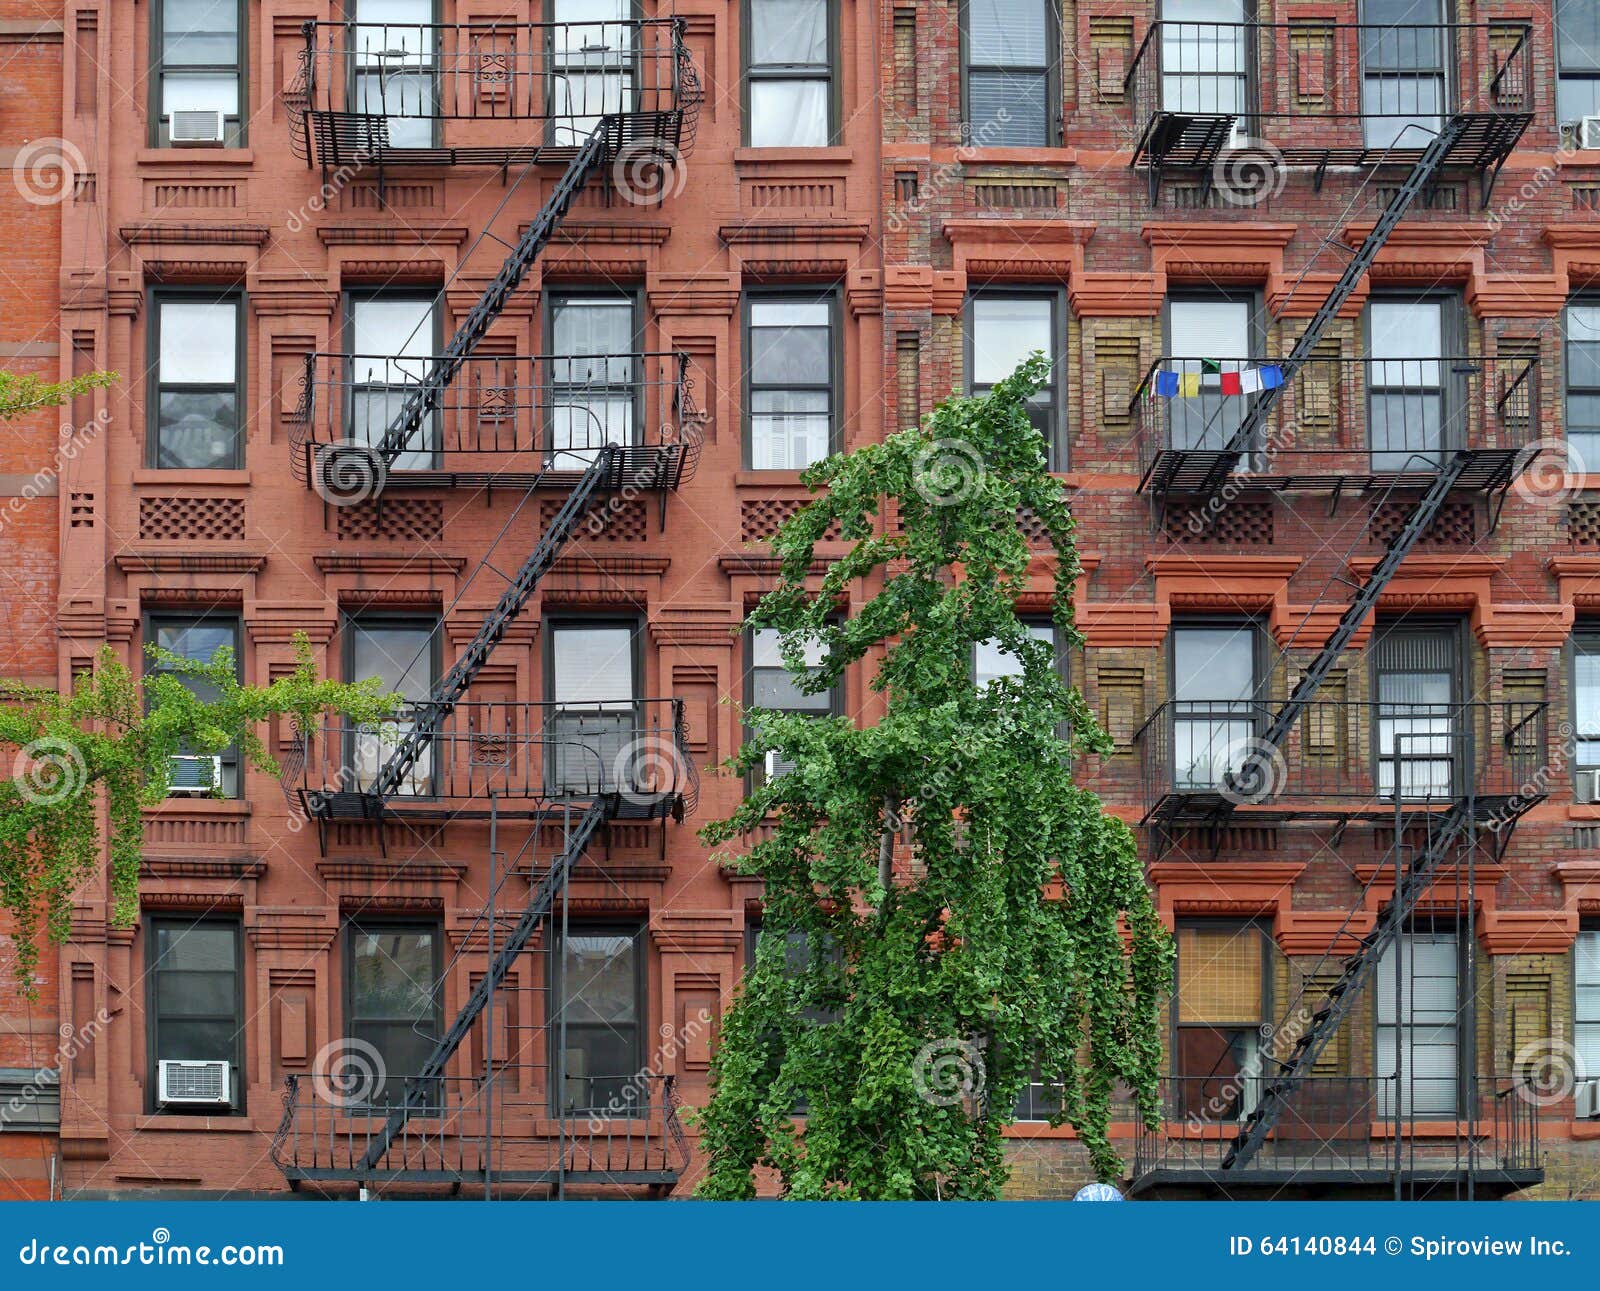 Manhattan Upper East Side Apartment Building Stock Photo - Image of ...